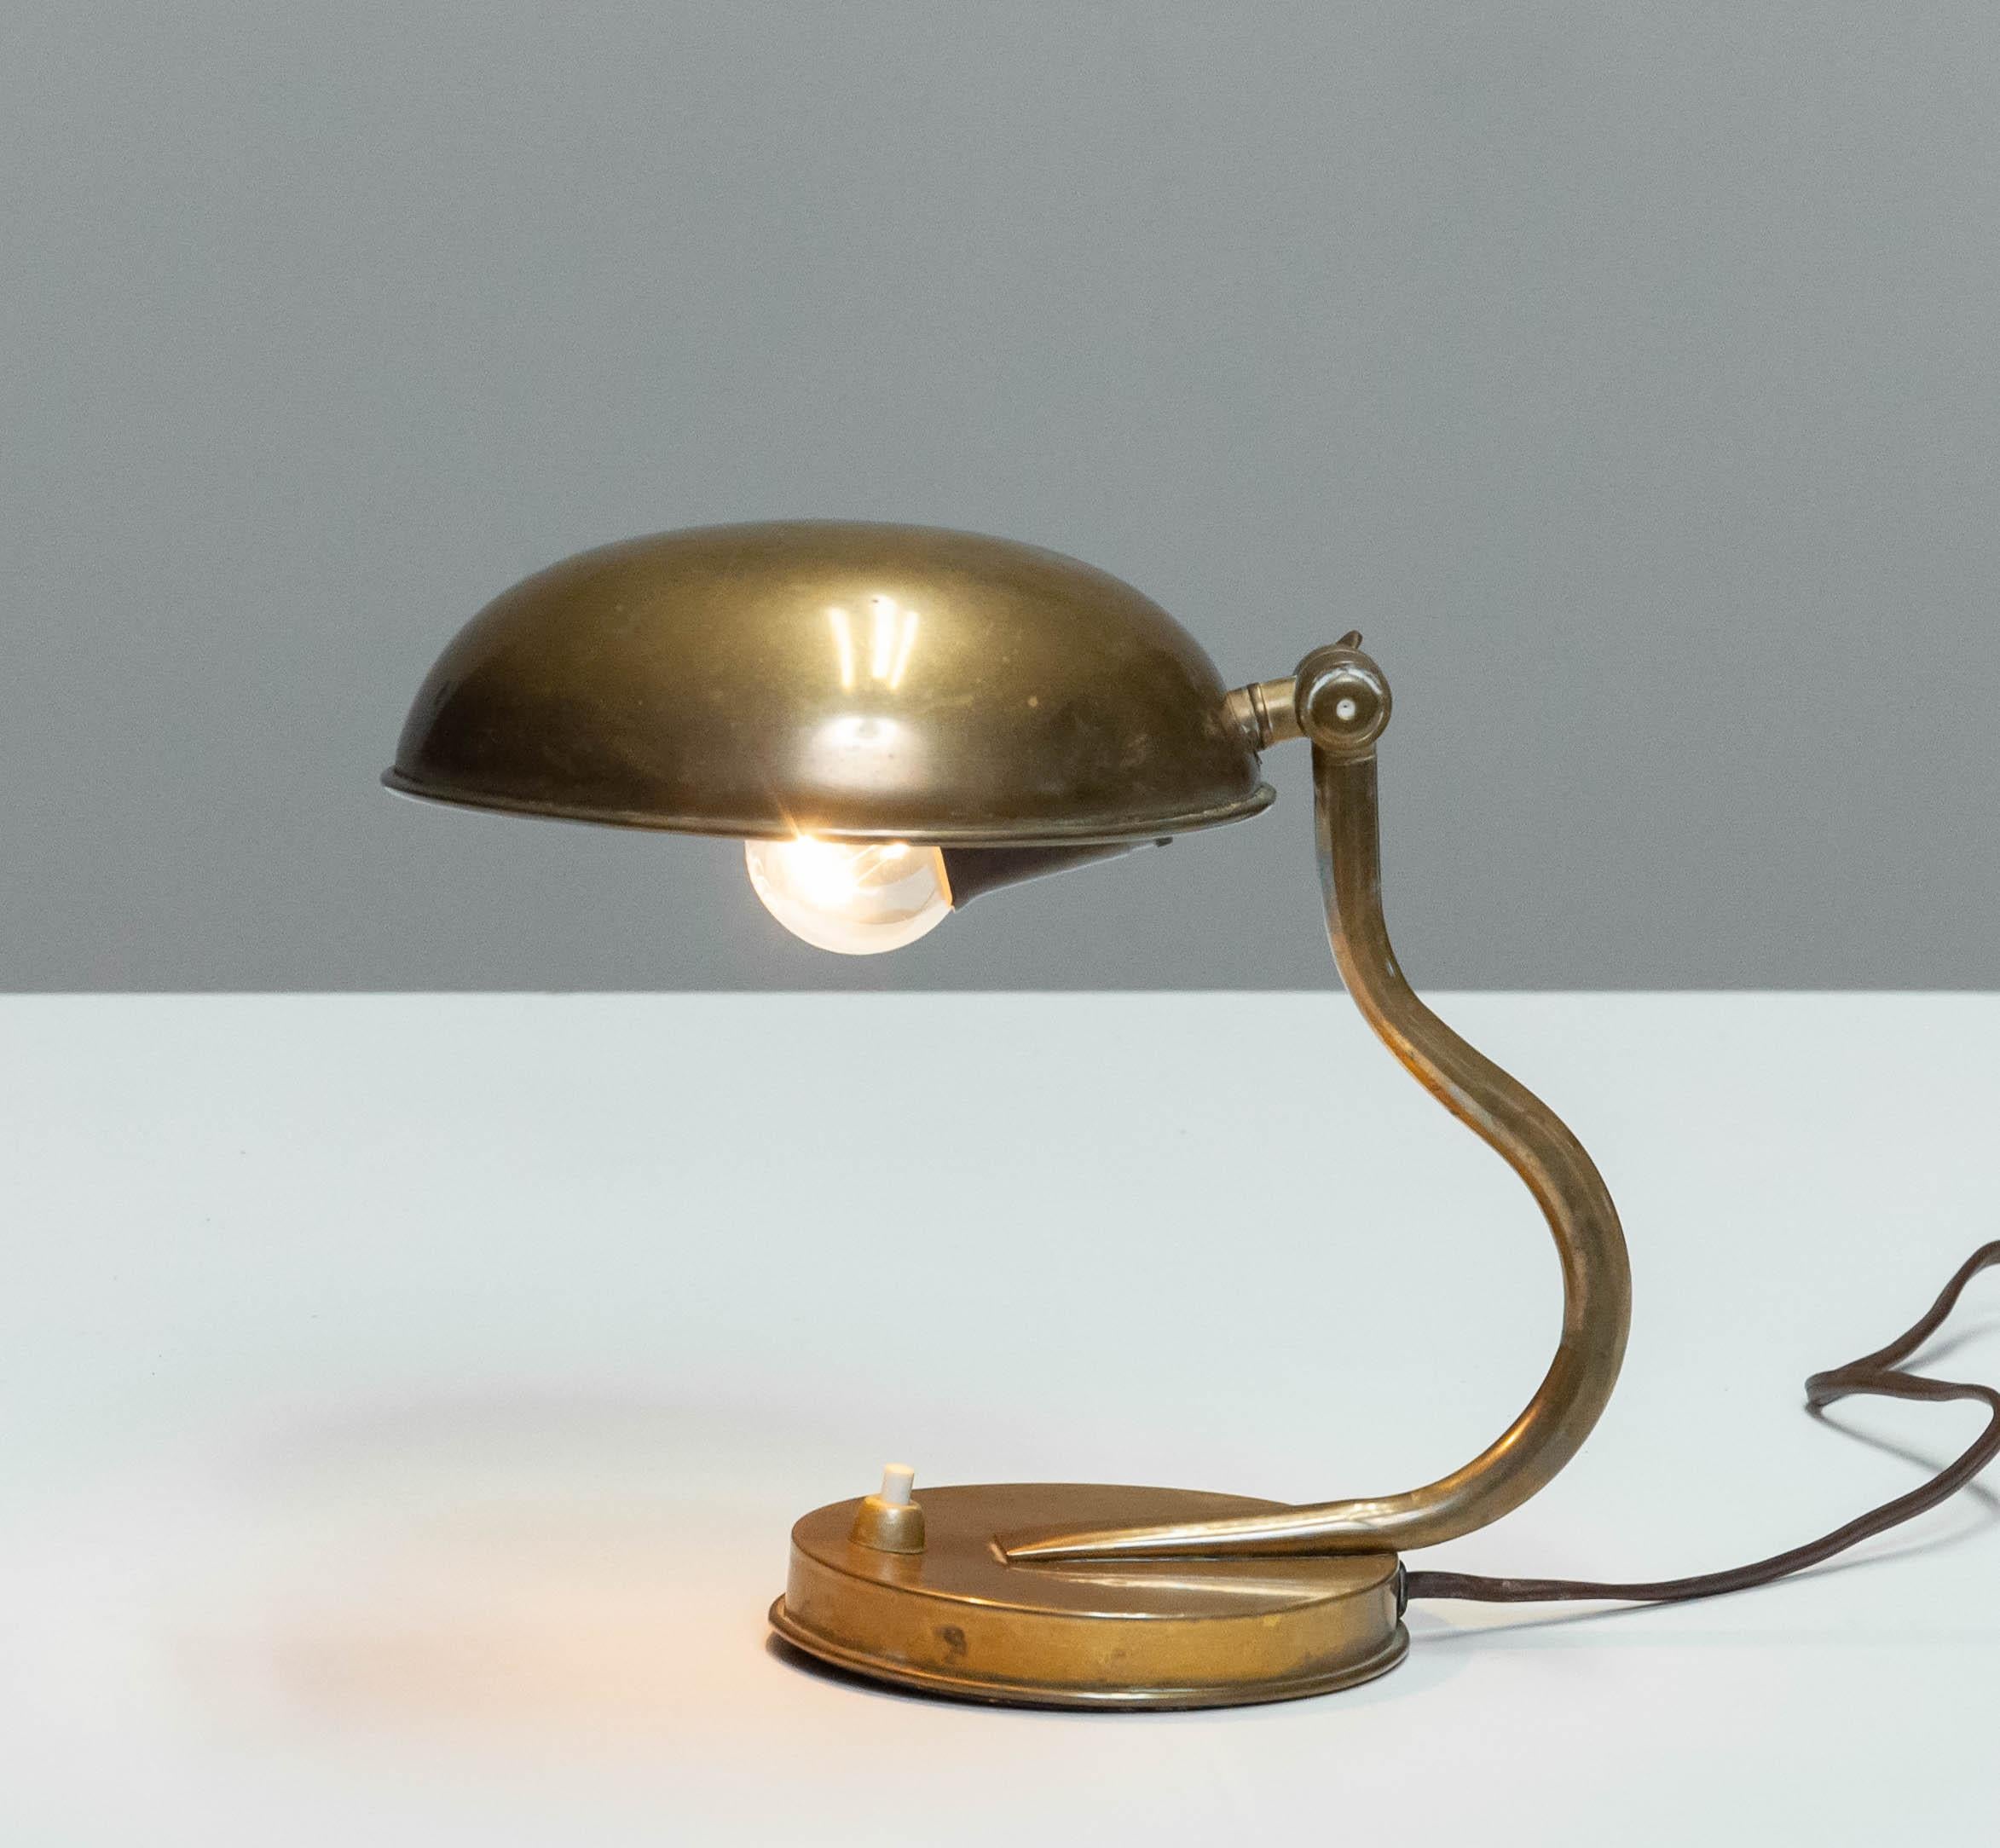 1930s 1940s Table / Desk Lamp with Adjustable Shade in Brass by ASEA In Good Condition For Sale In Silvolde, Gelderland